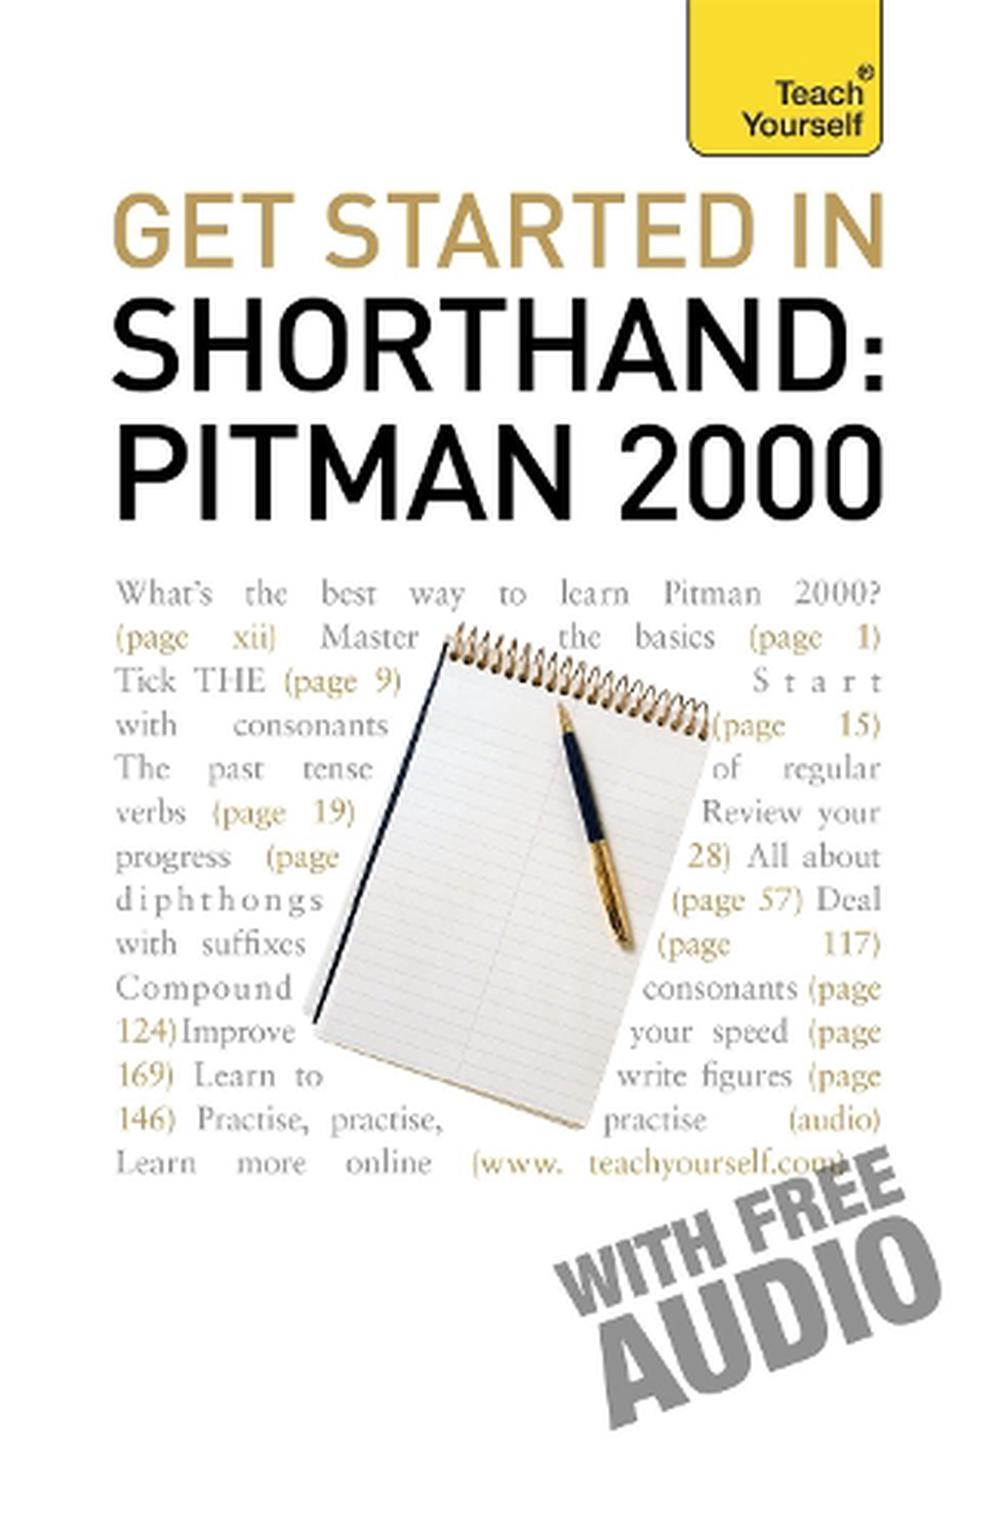 Get Started in Shorthand Pitman 2000 Teach Yourself Master the basics